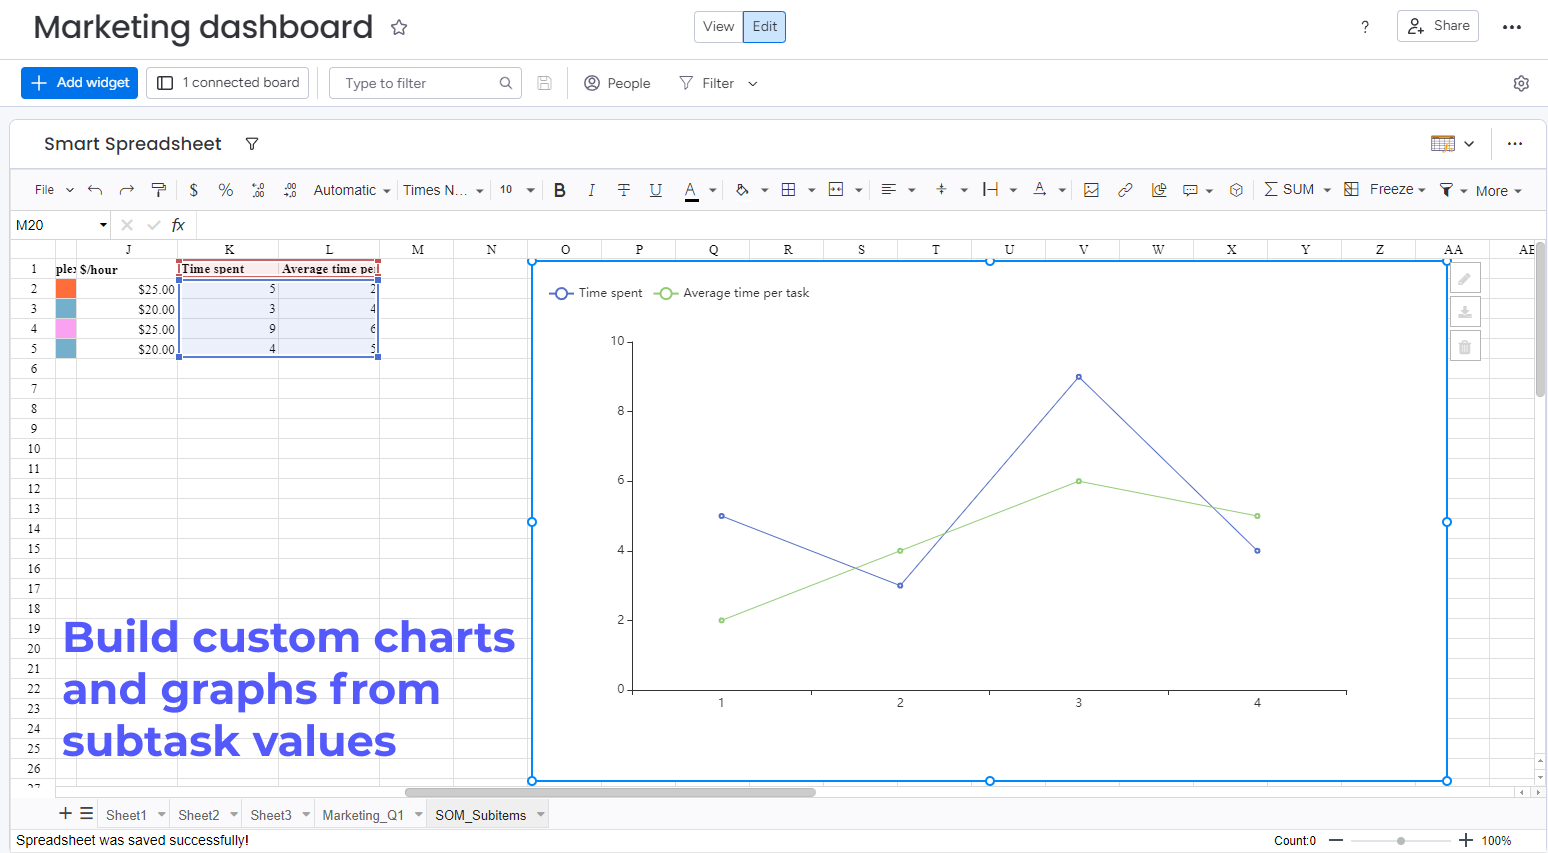 Custom graphs and charts from subitems